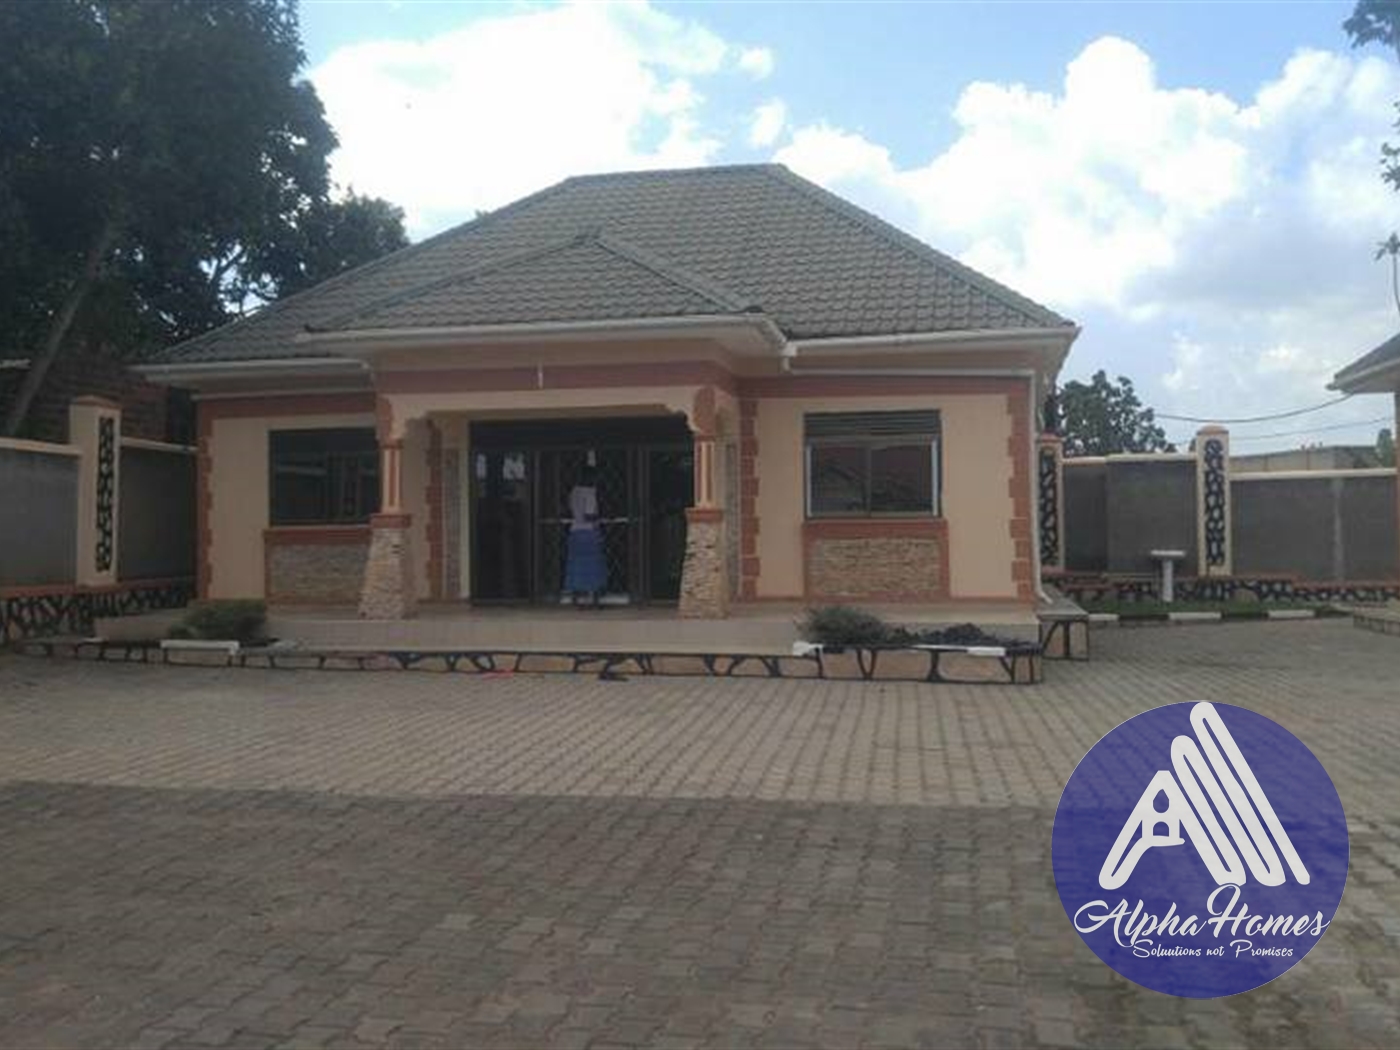 Semi Detached for rent in Bweyogerere Mukono